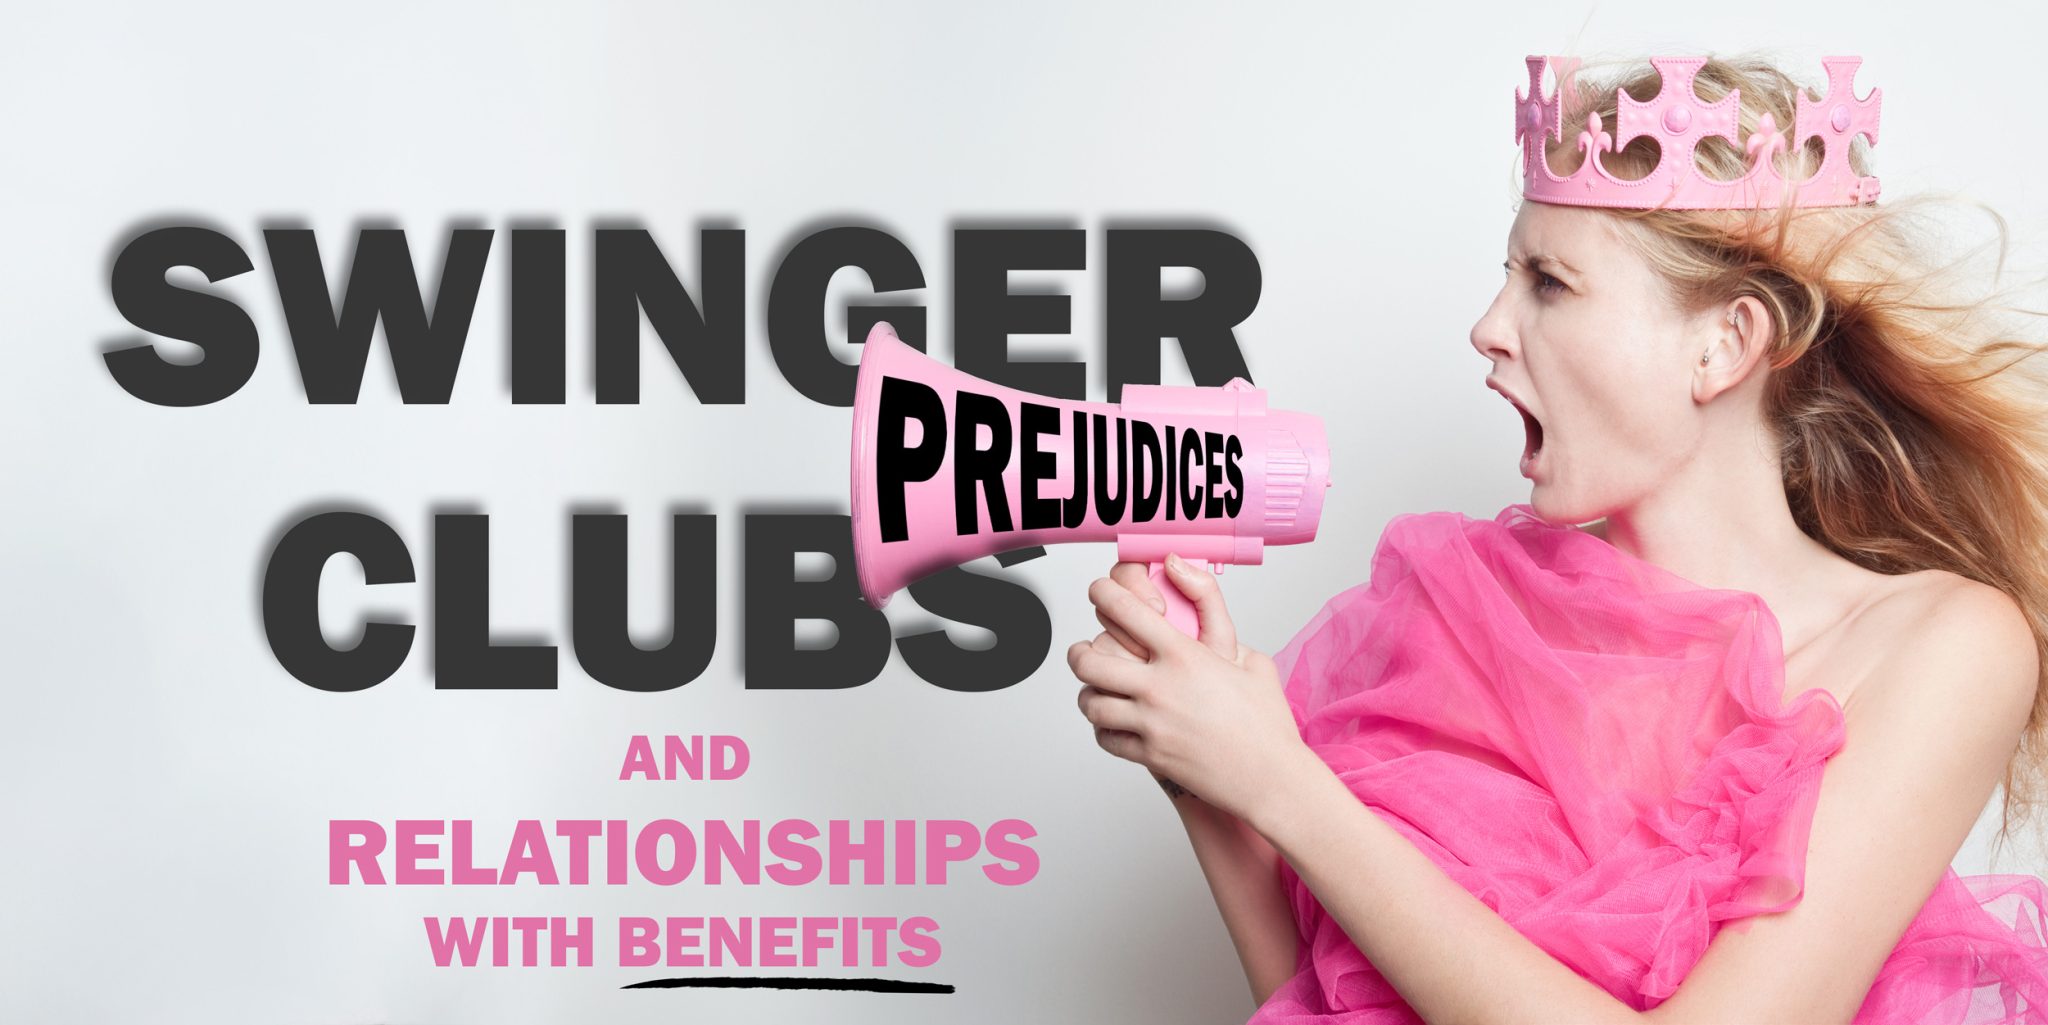 Prejudices about swinger clubs and relationships with benefits -